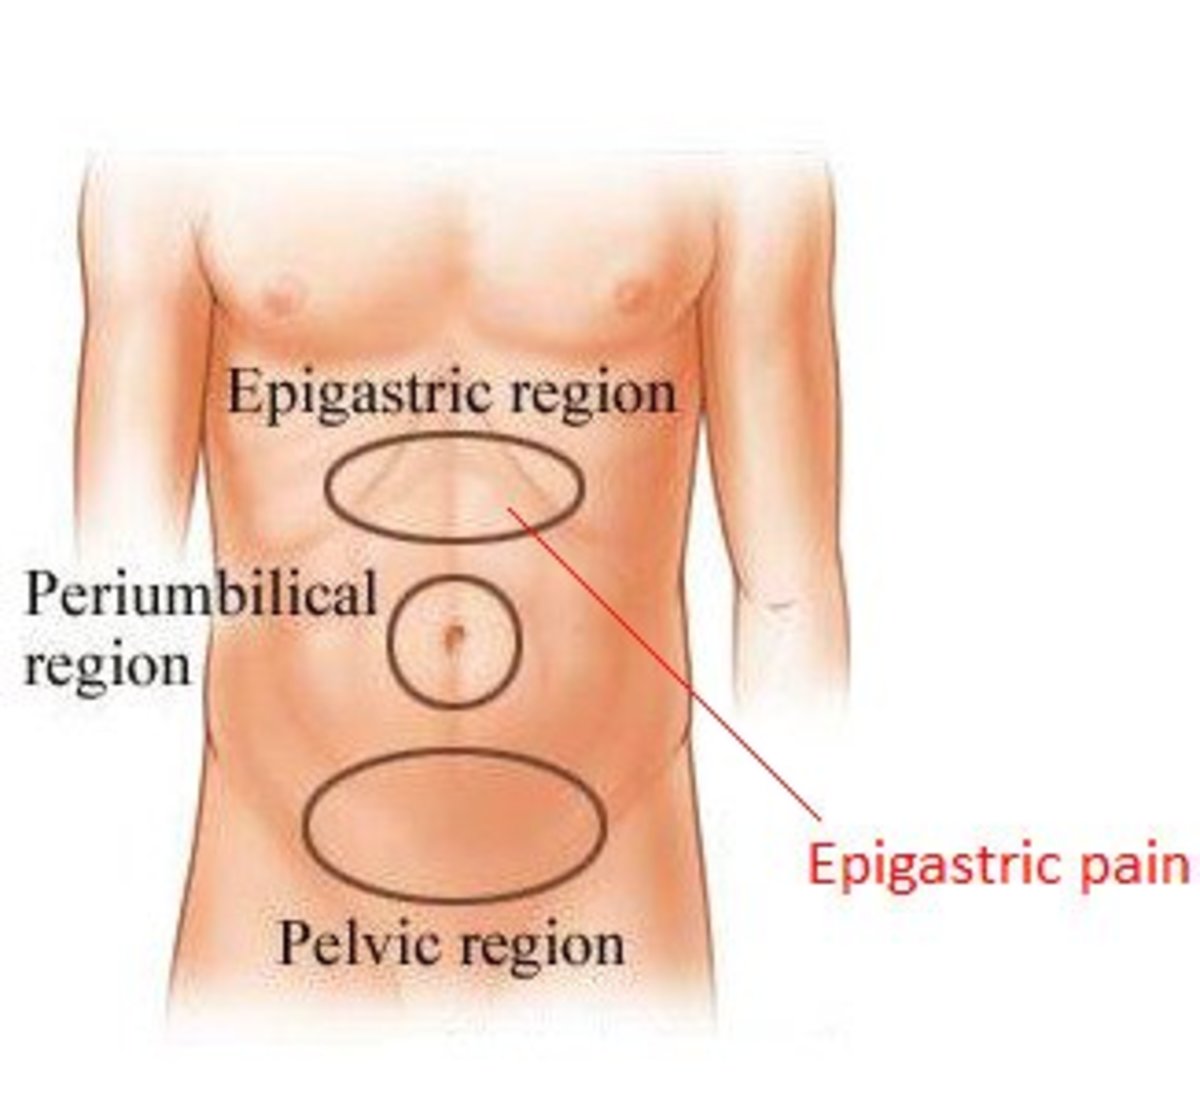 Epigastric Pain - Location, Causes and Treatment